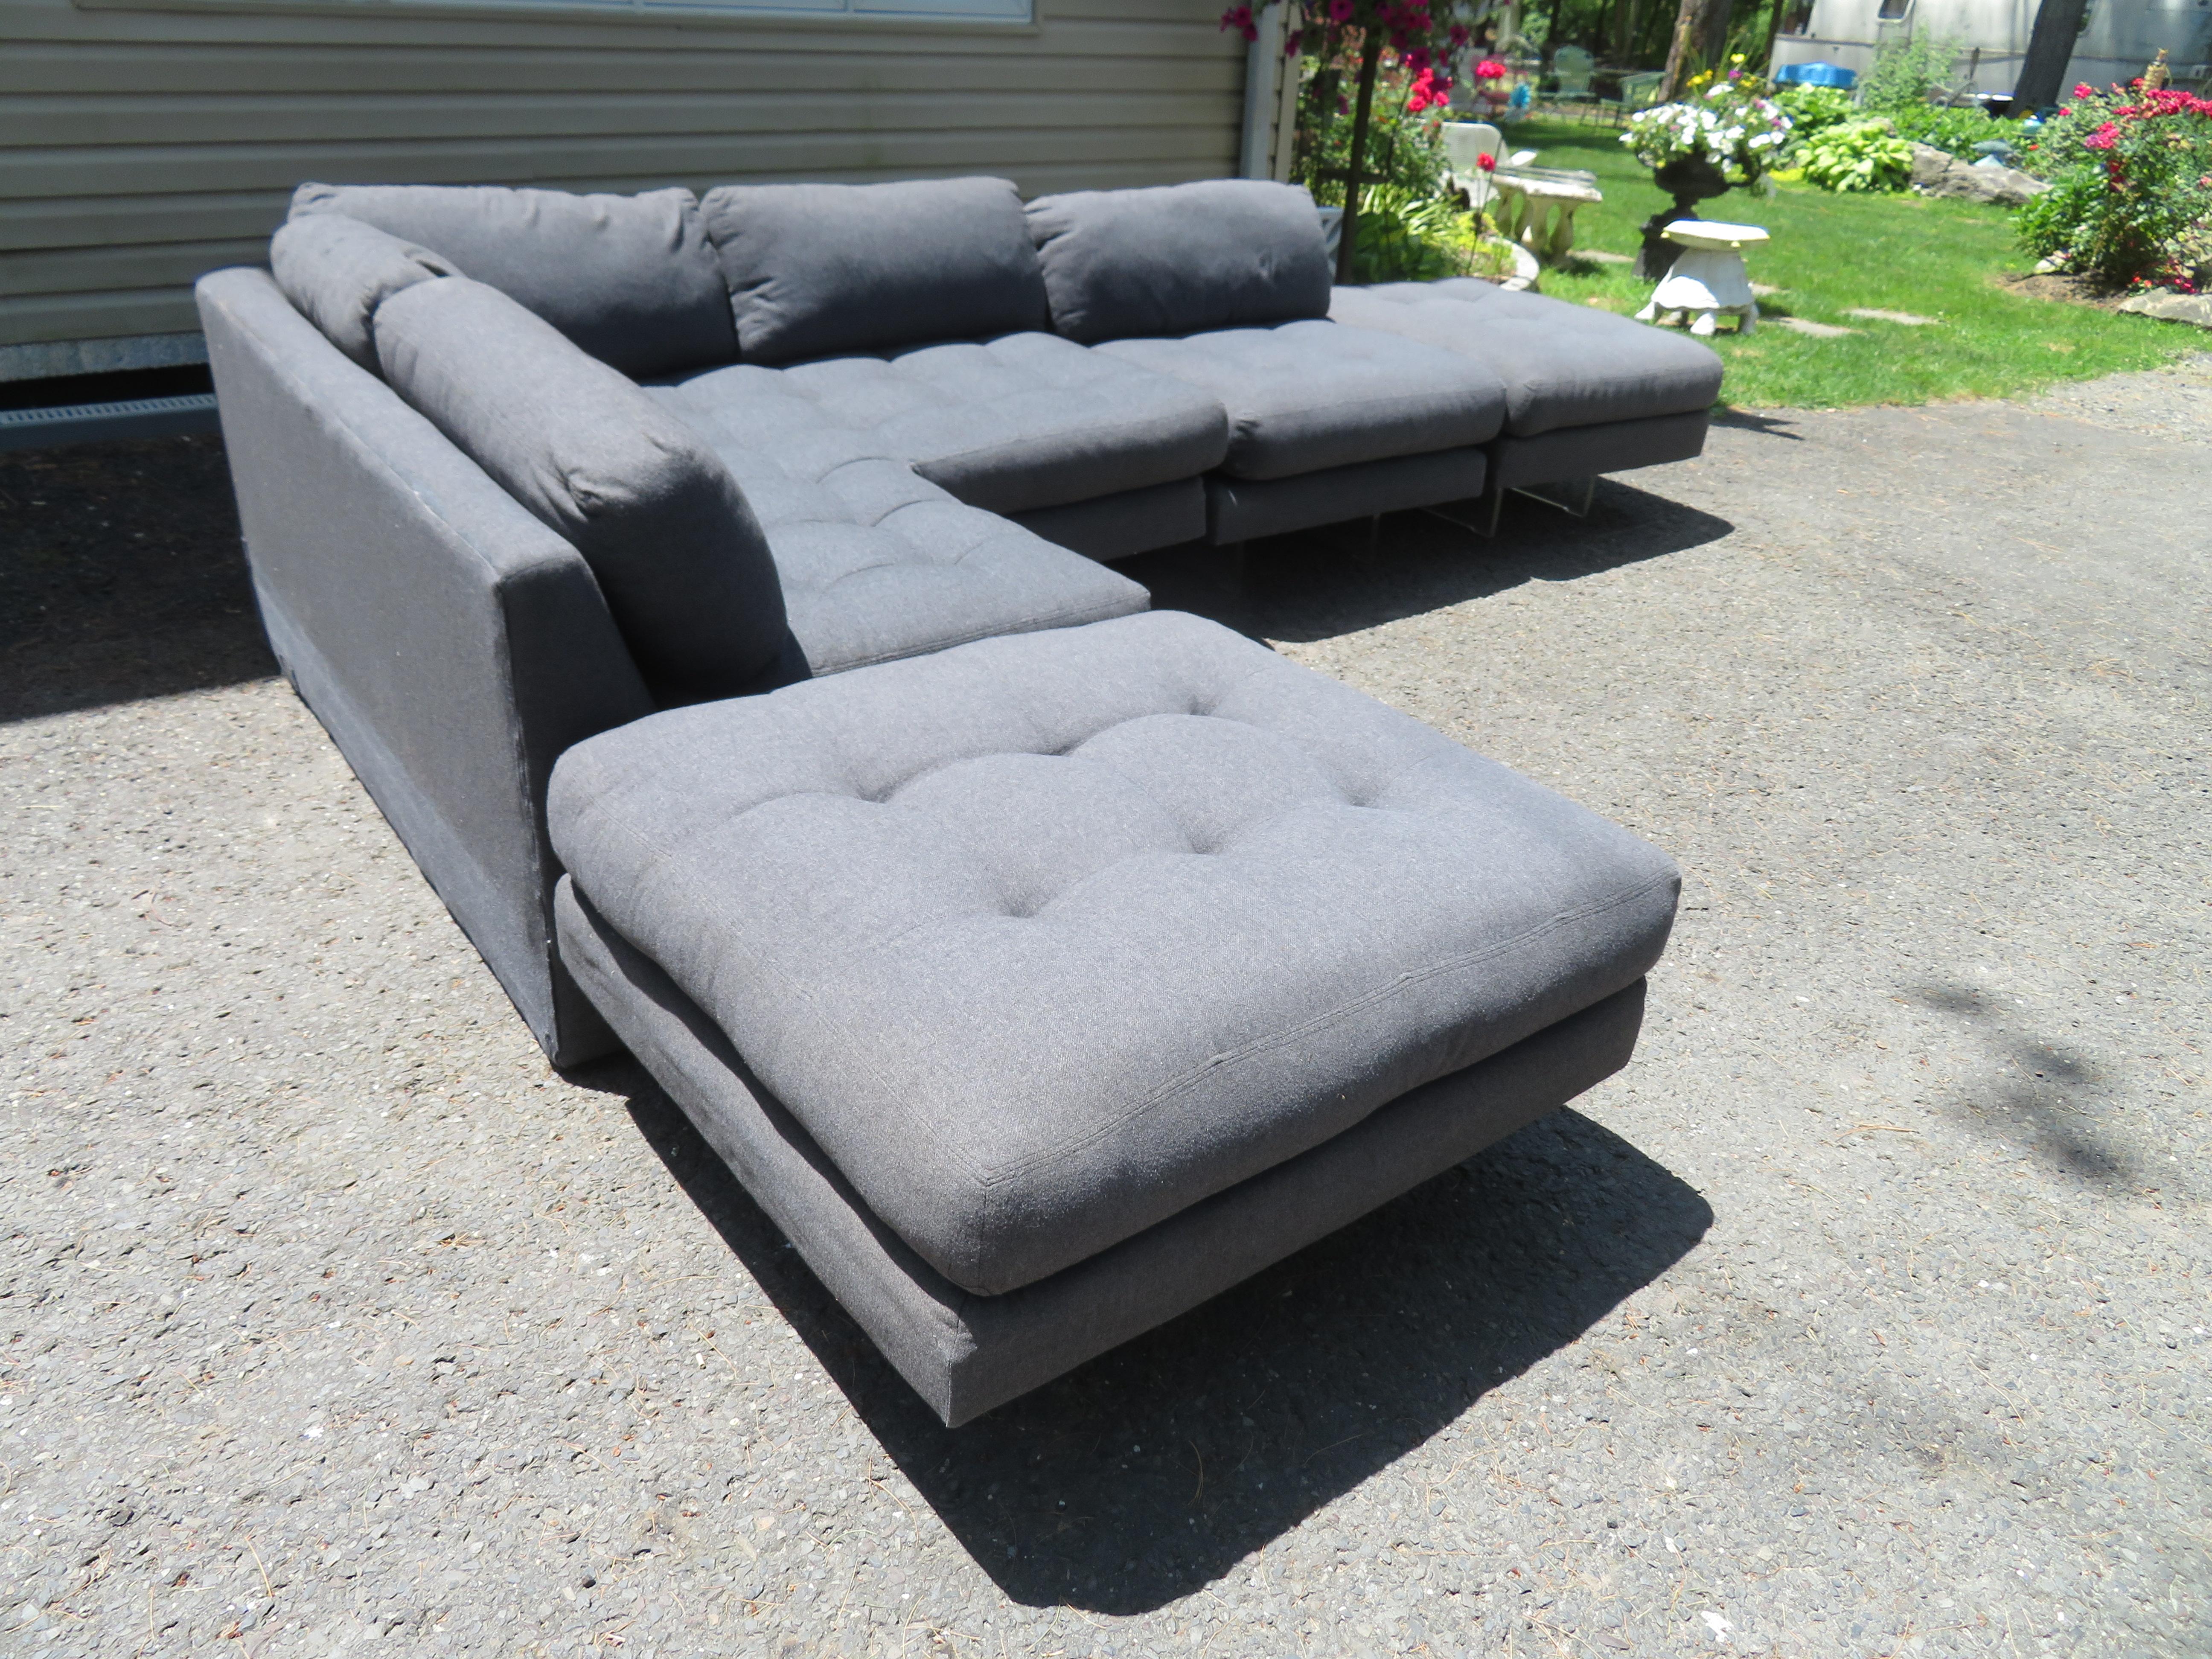 Wonderful 4-piece Vladimir Kagan Omnibus sectional sofa. This sectional can be arranged as pictured or can be configured as you please. The pieces are supported on Kagan’s trademark lucite bases, giving the sofa a modern floating appearance. Set